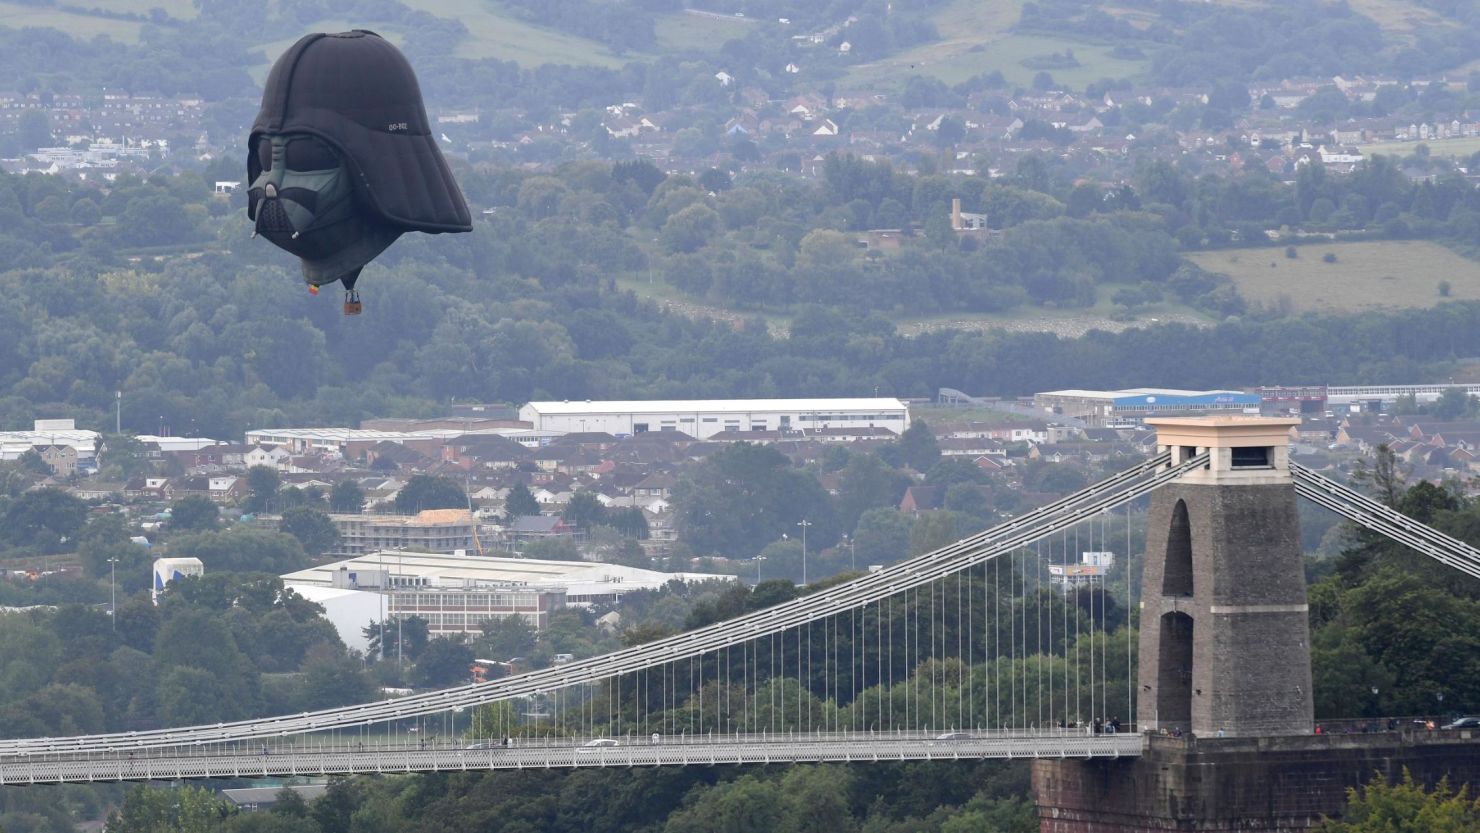 The balloon is flying over Bristol, where it was made, for the first time.